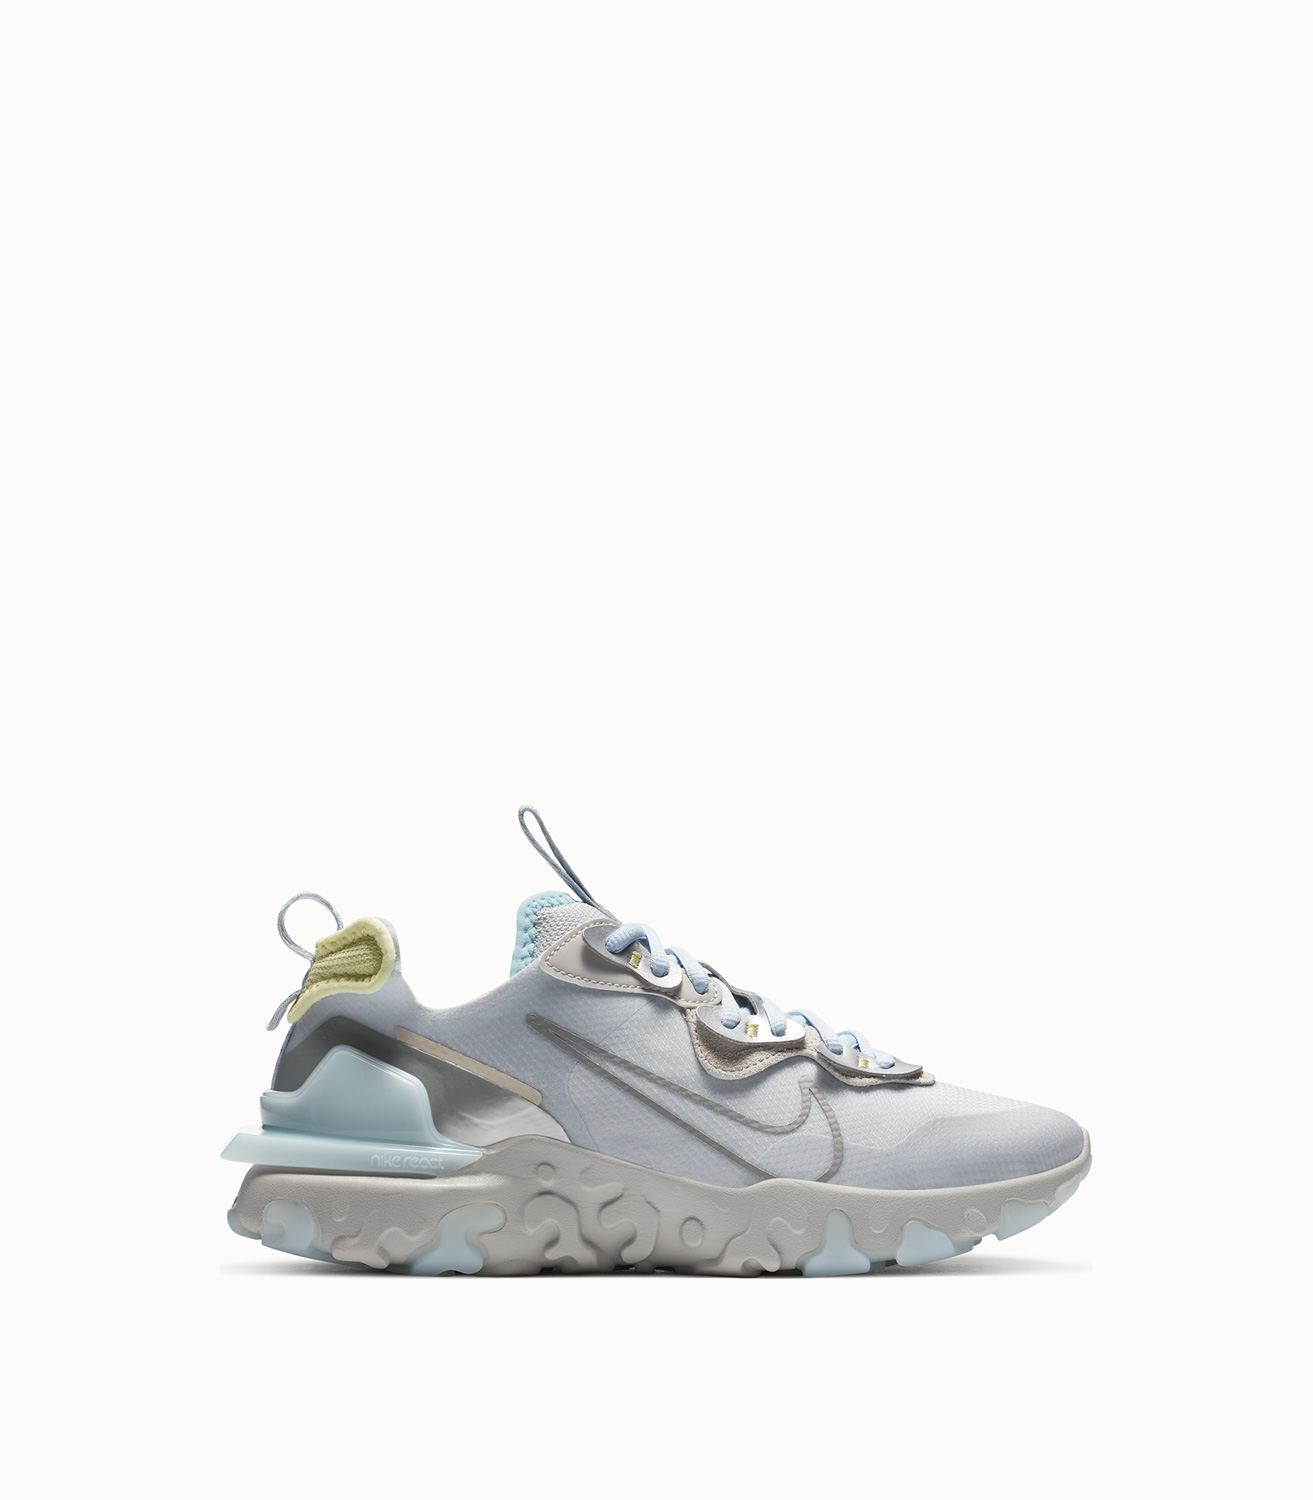 NIKE REACT VISION SNEAKERS COLOR LIGHT 